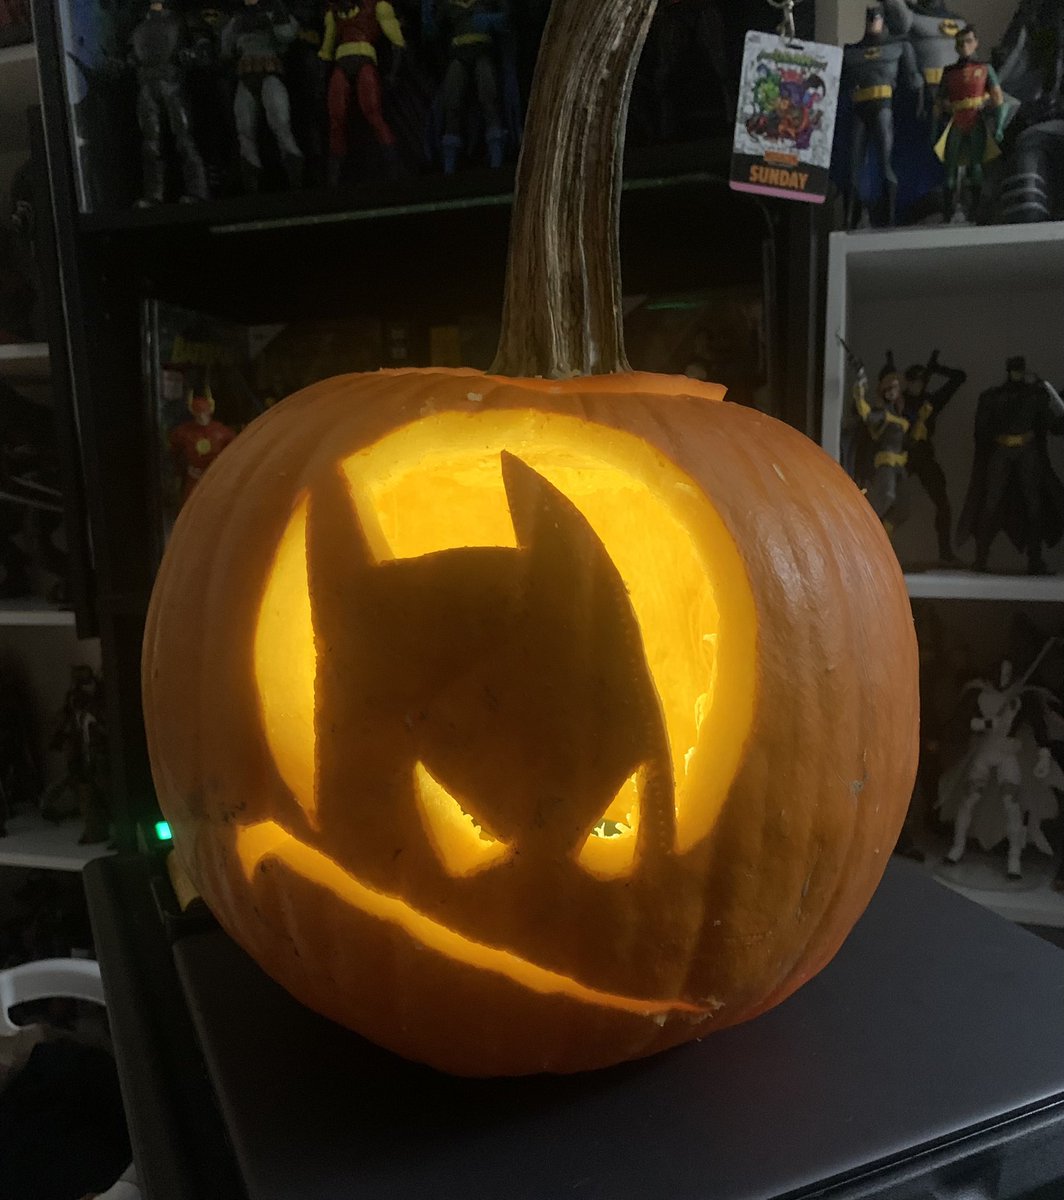 Just finished carving our pumpkin and had to stay on brand! #BTAS #Batman #TheLongHalloween